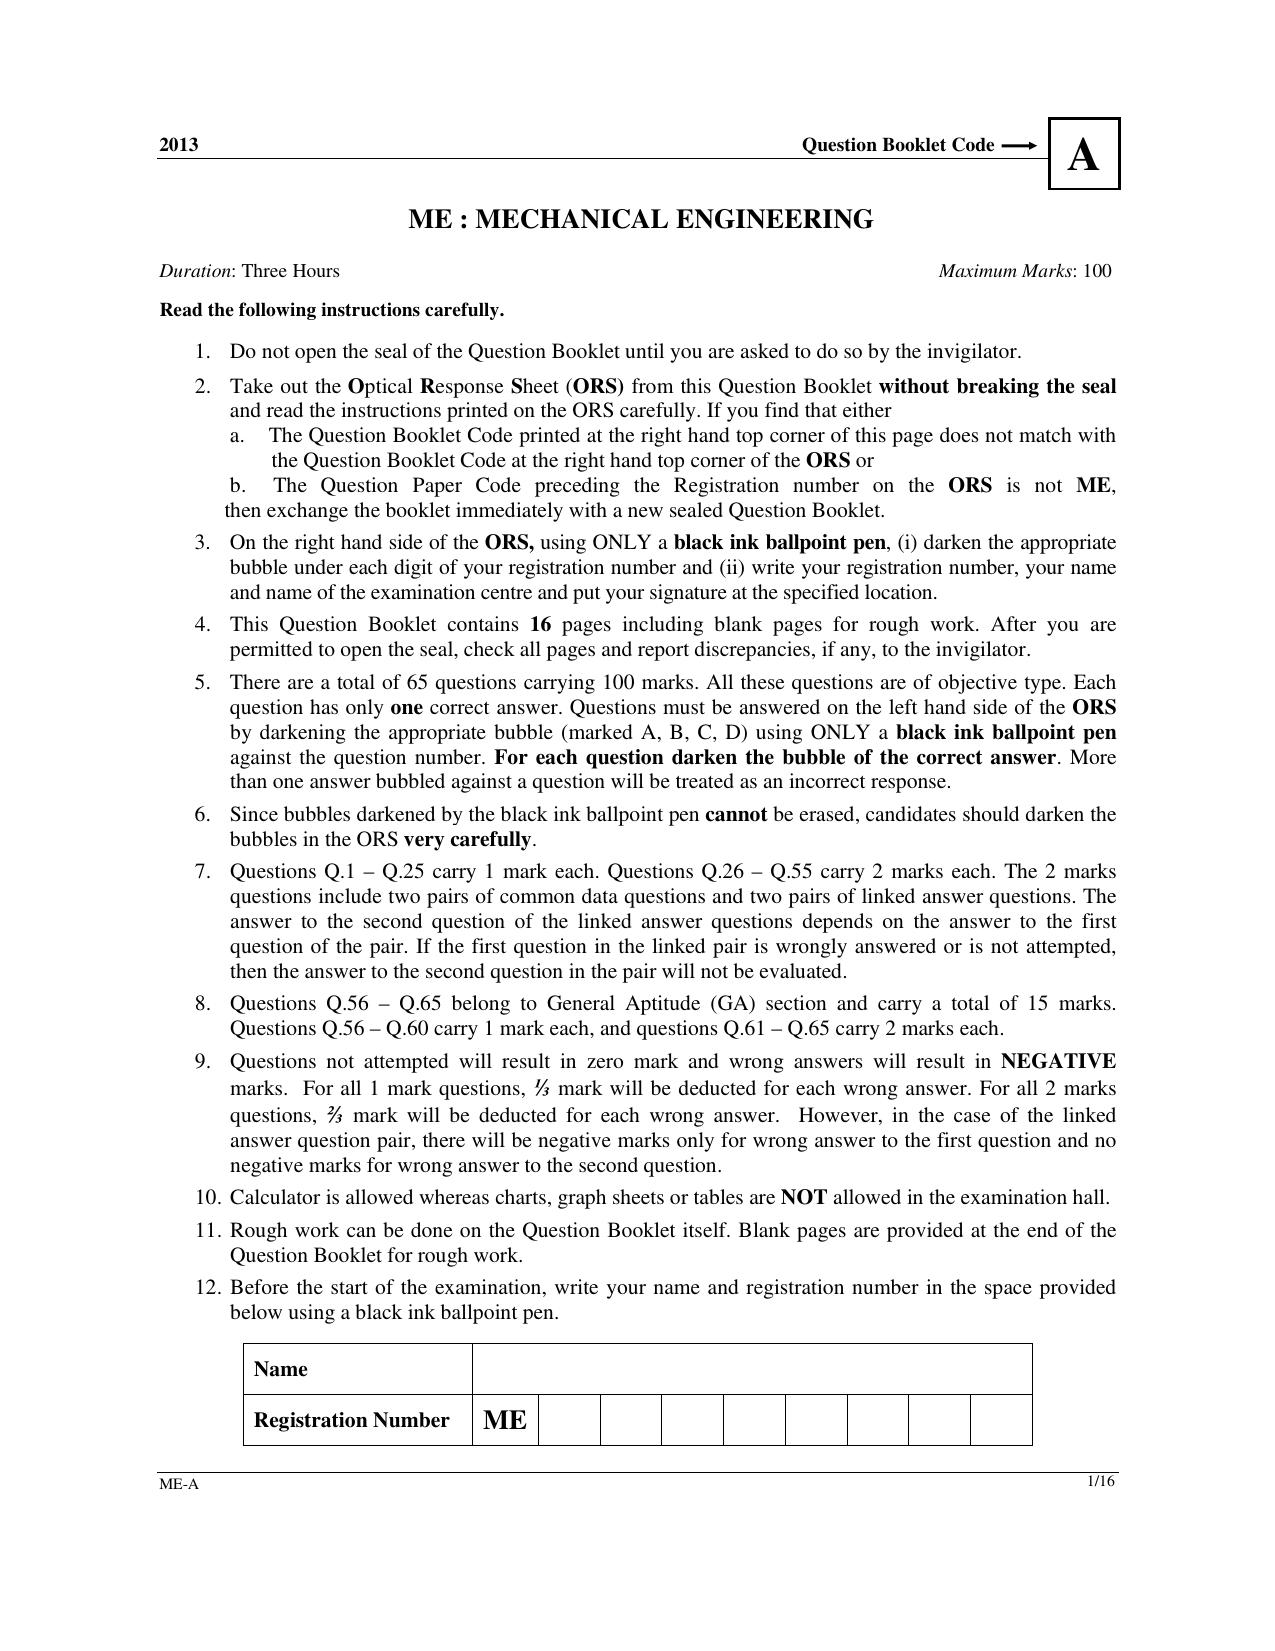 GATE 2013 Mechanical Engineering (ME) Question Paper with Answer Key - Page 2